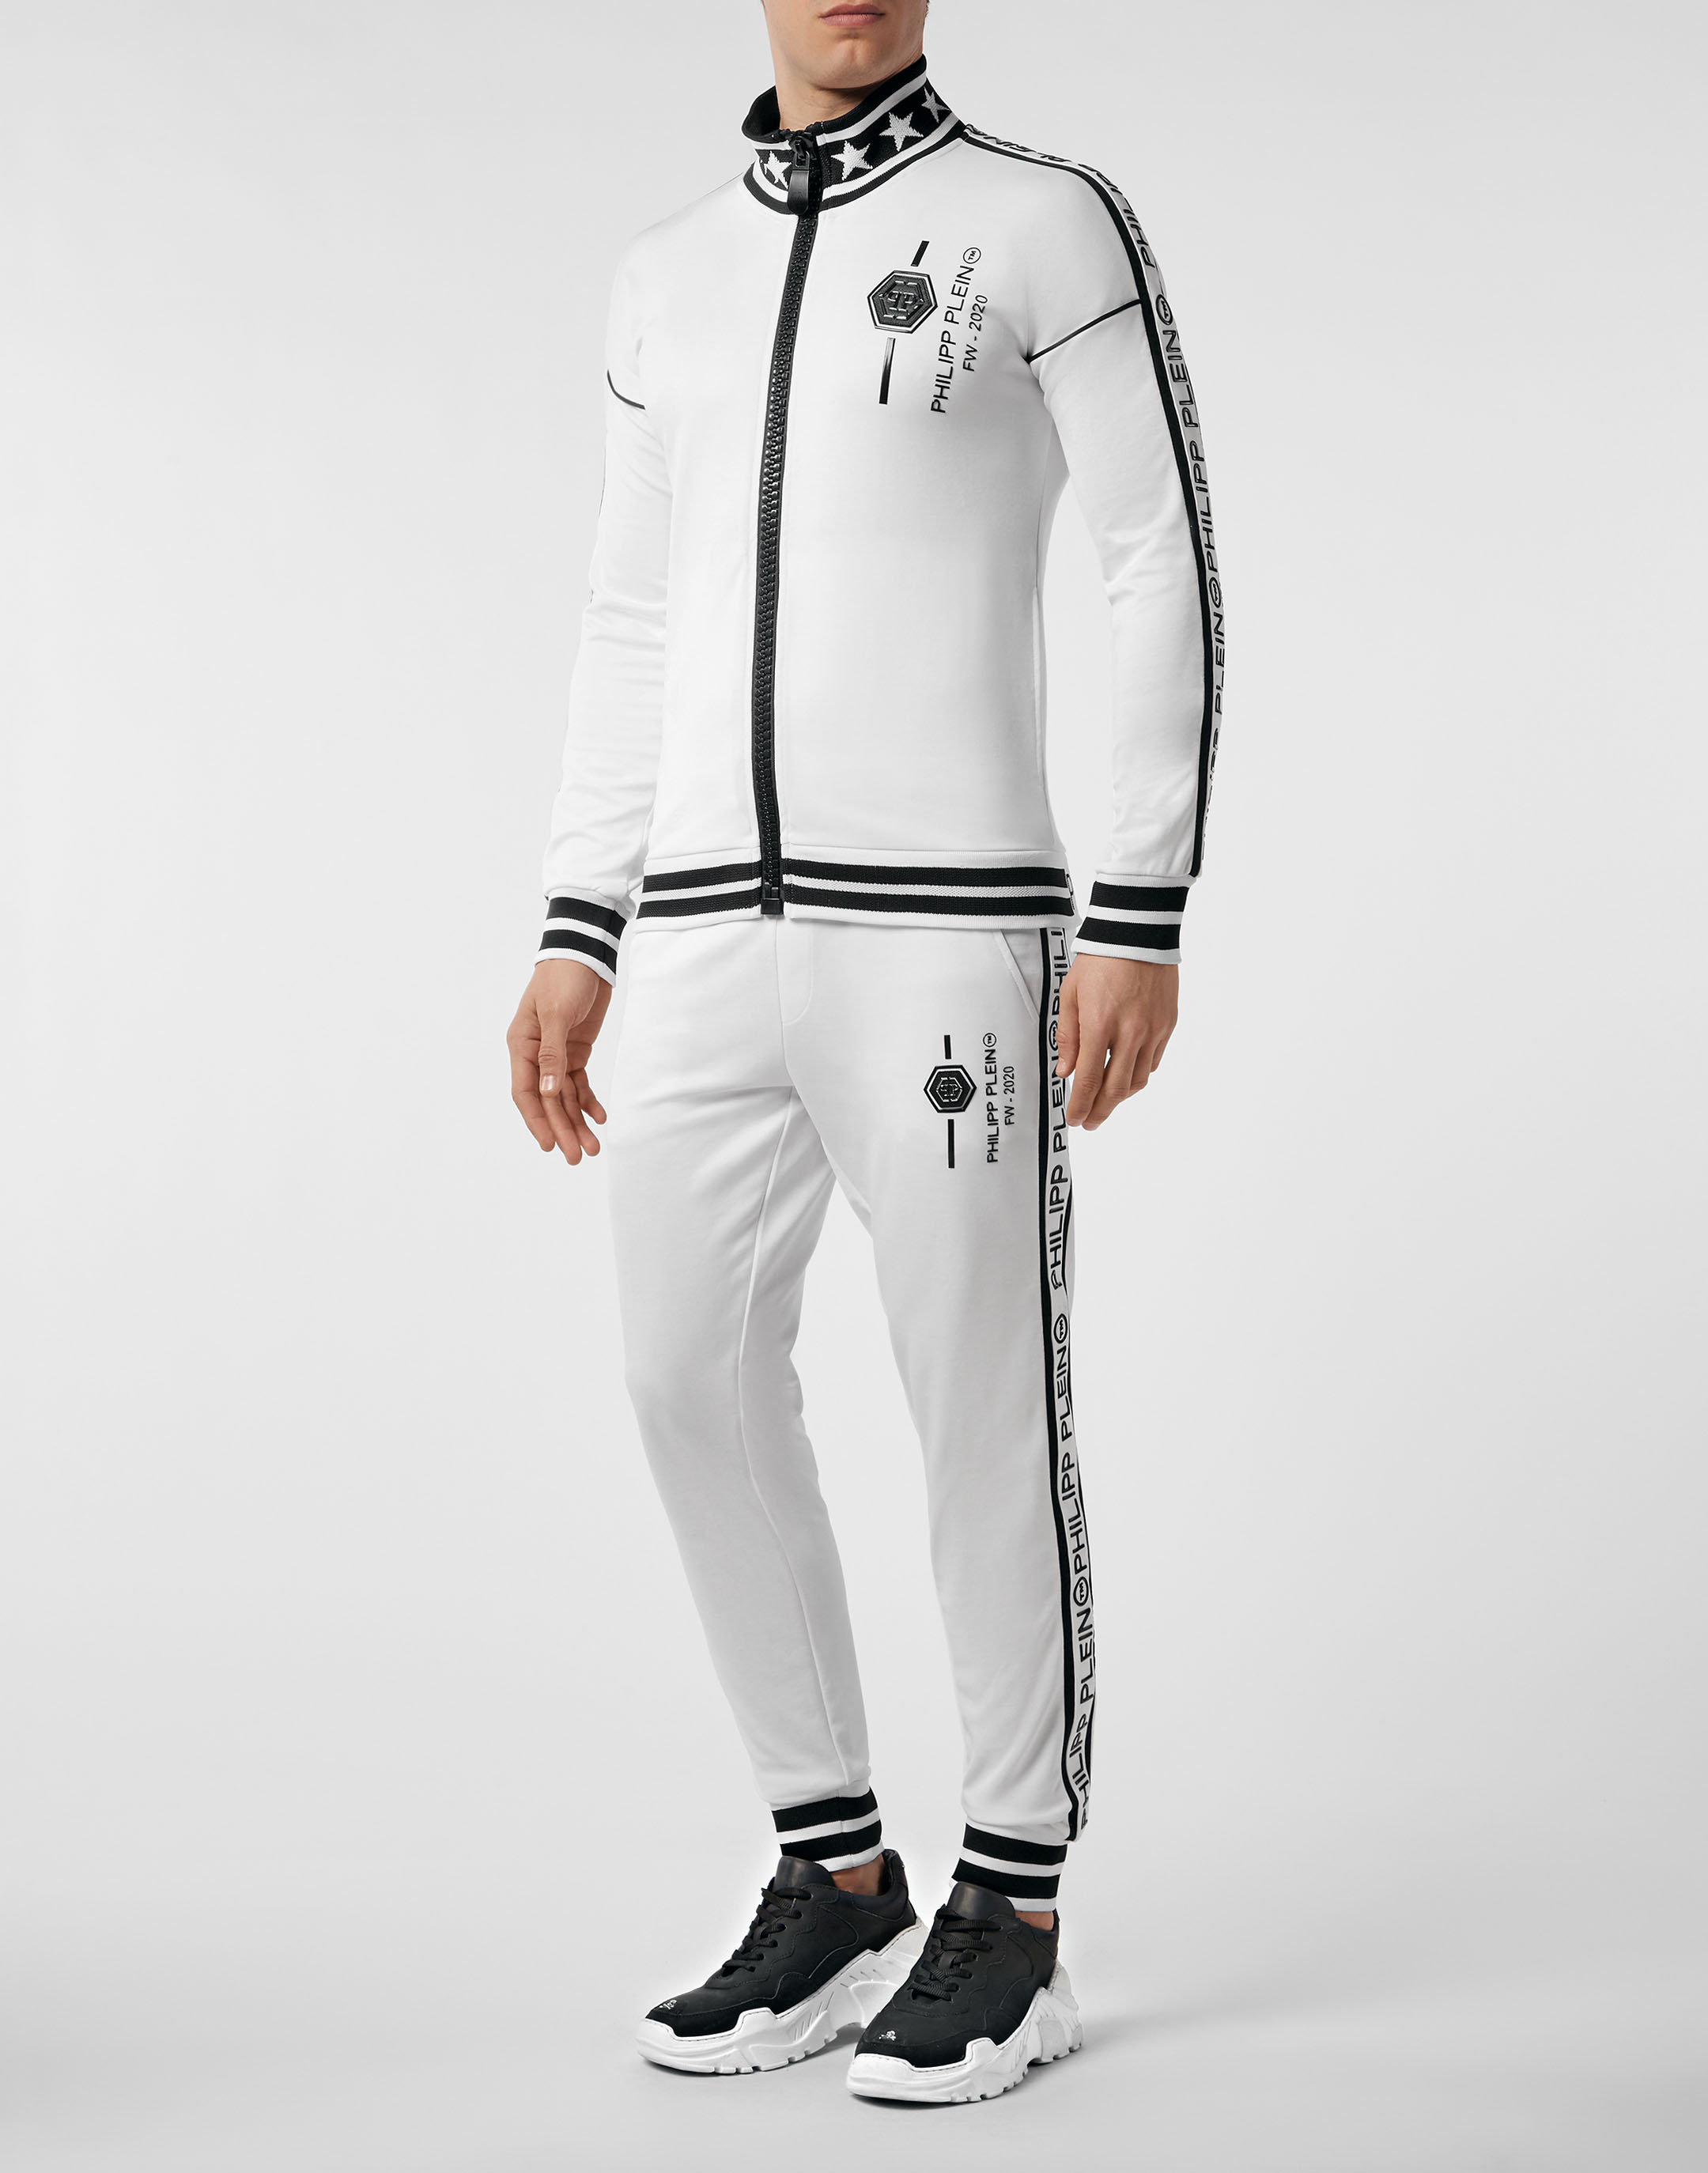 Jogging Jacket Anniversary 20th | Philipp Plein Outlet